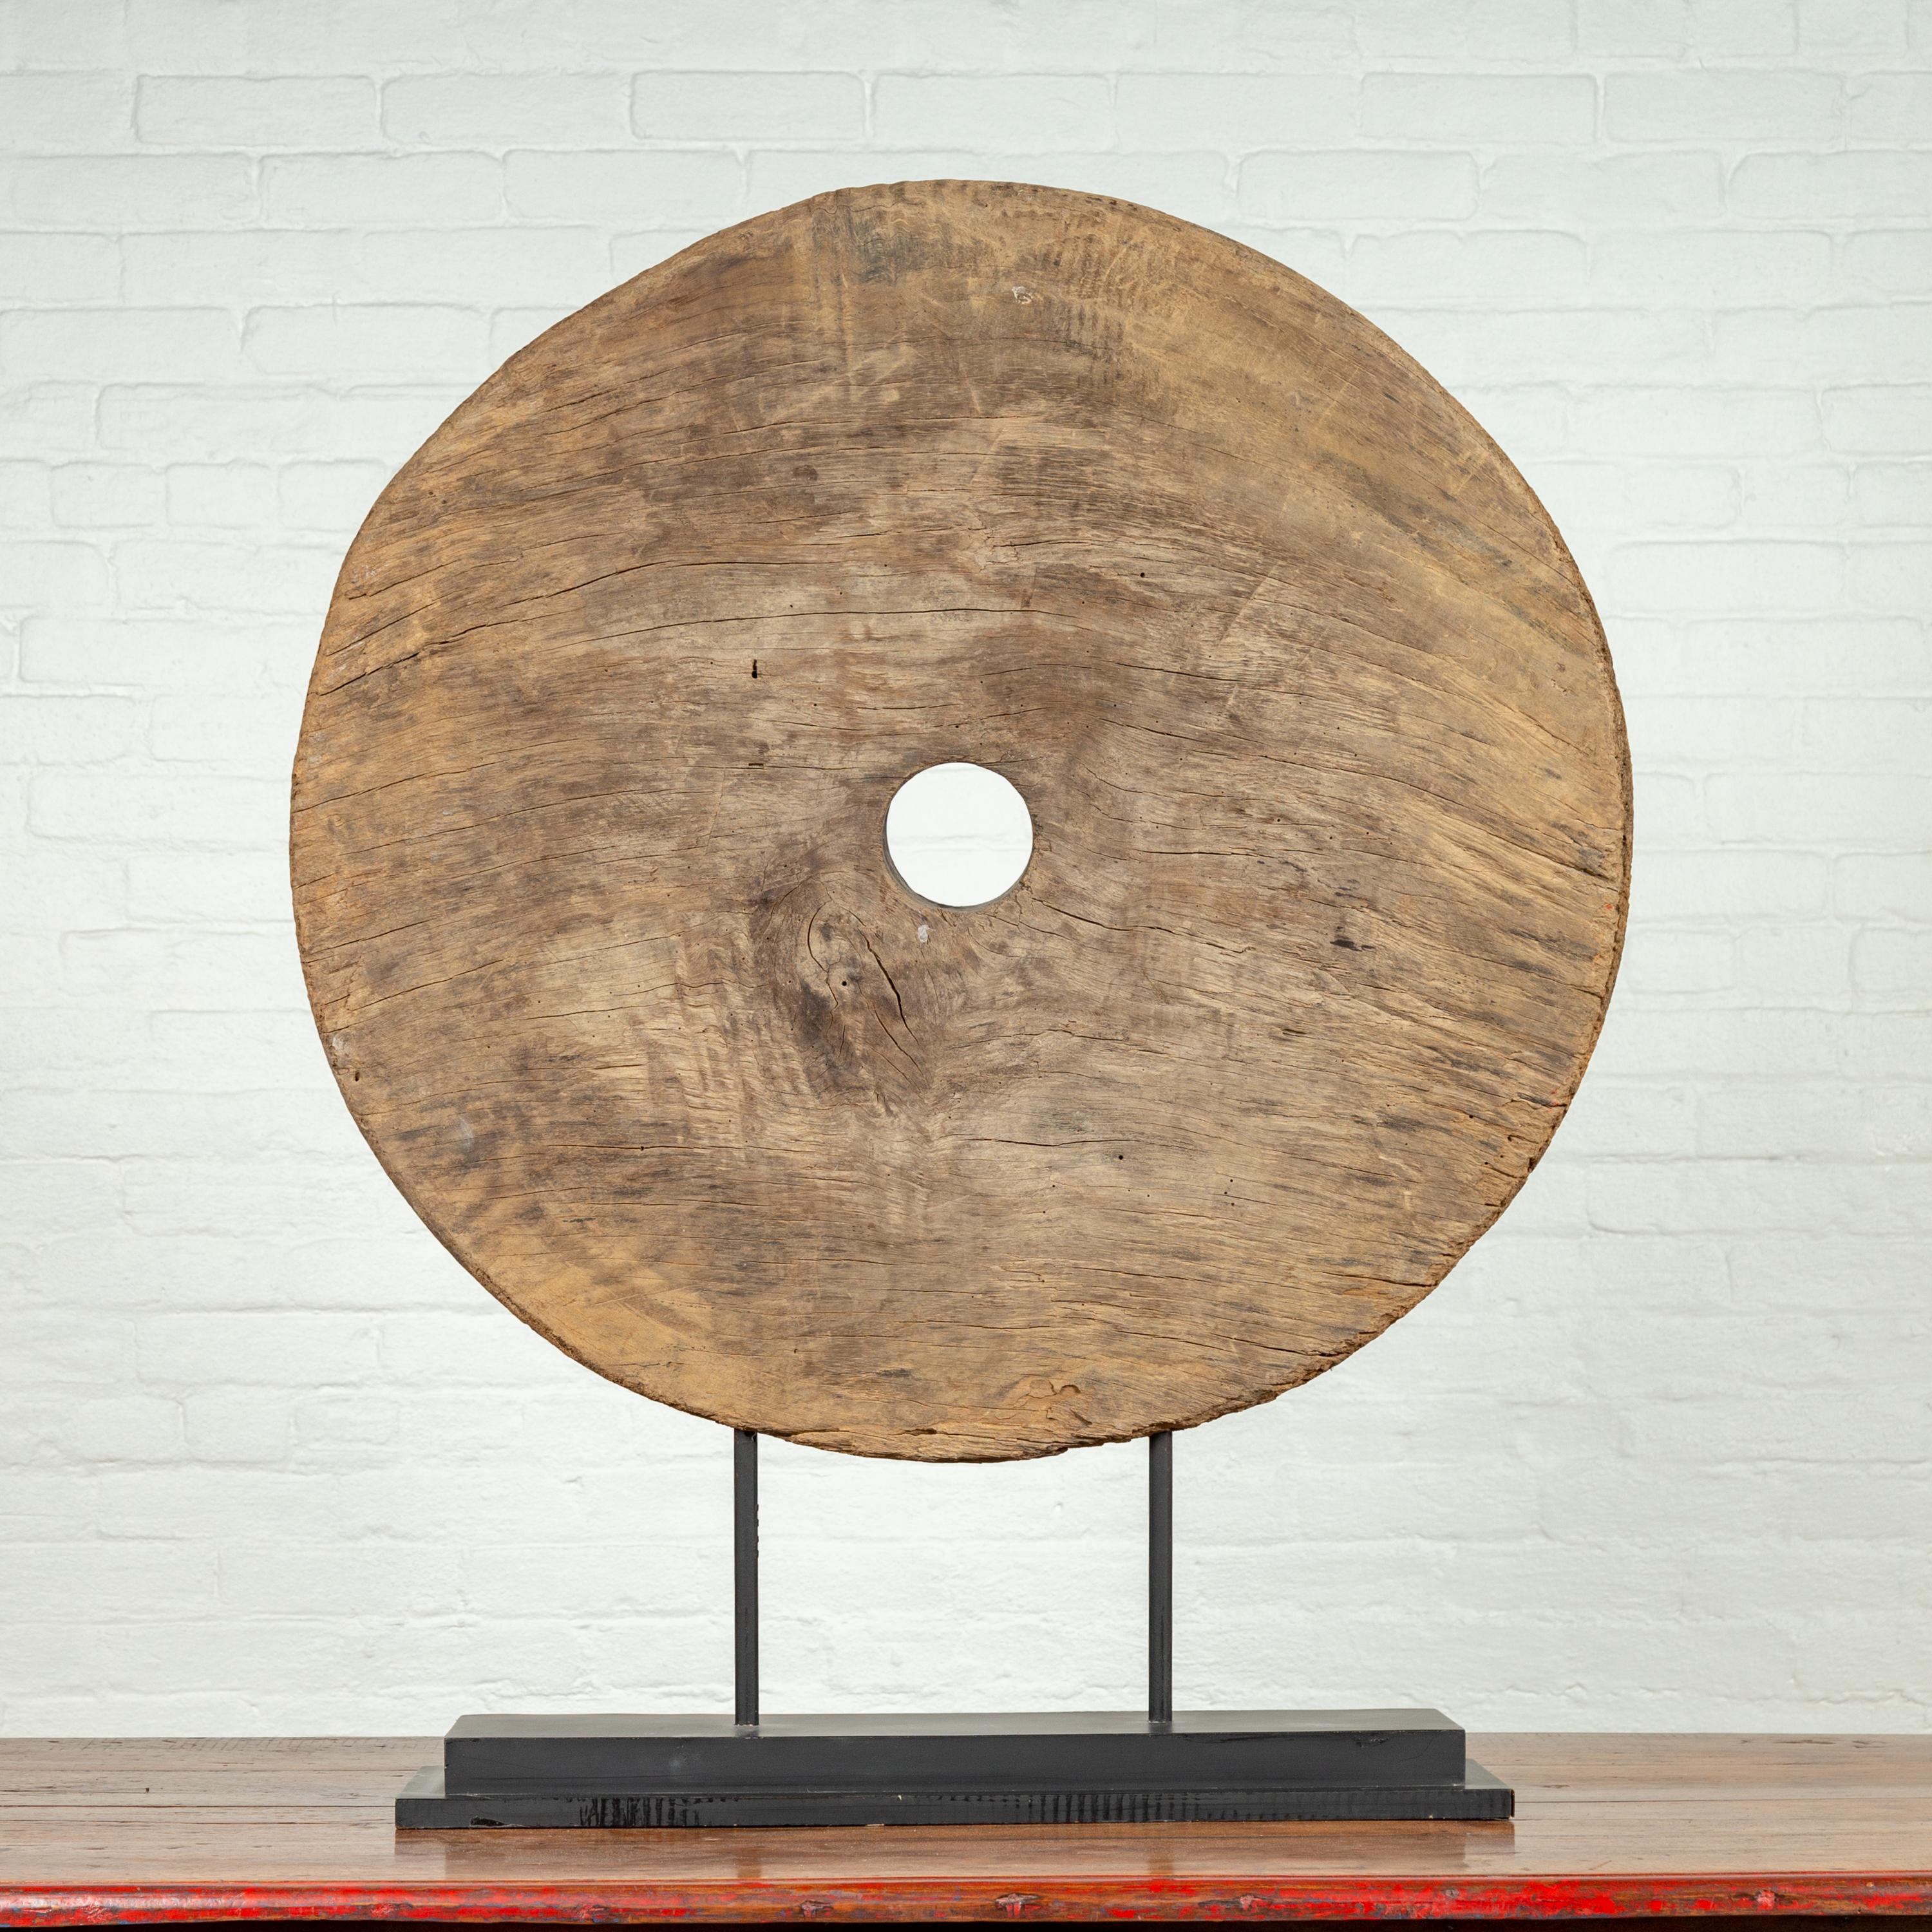 A rustic Thai 19th century ox cart wooden wheel mounted on a custom made black wooden stand. Born in Thailand during the 19th century, this handmade wheel is pierced in its center with a circular hole reserved for the axle tree. The wheel showcases